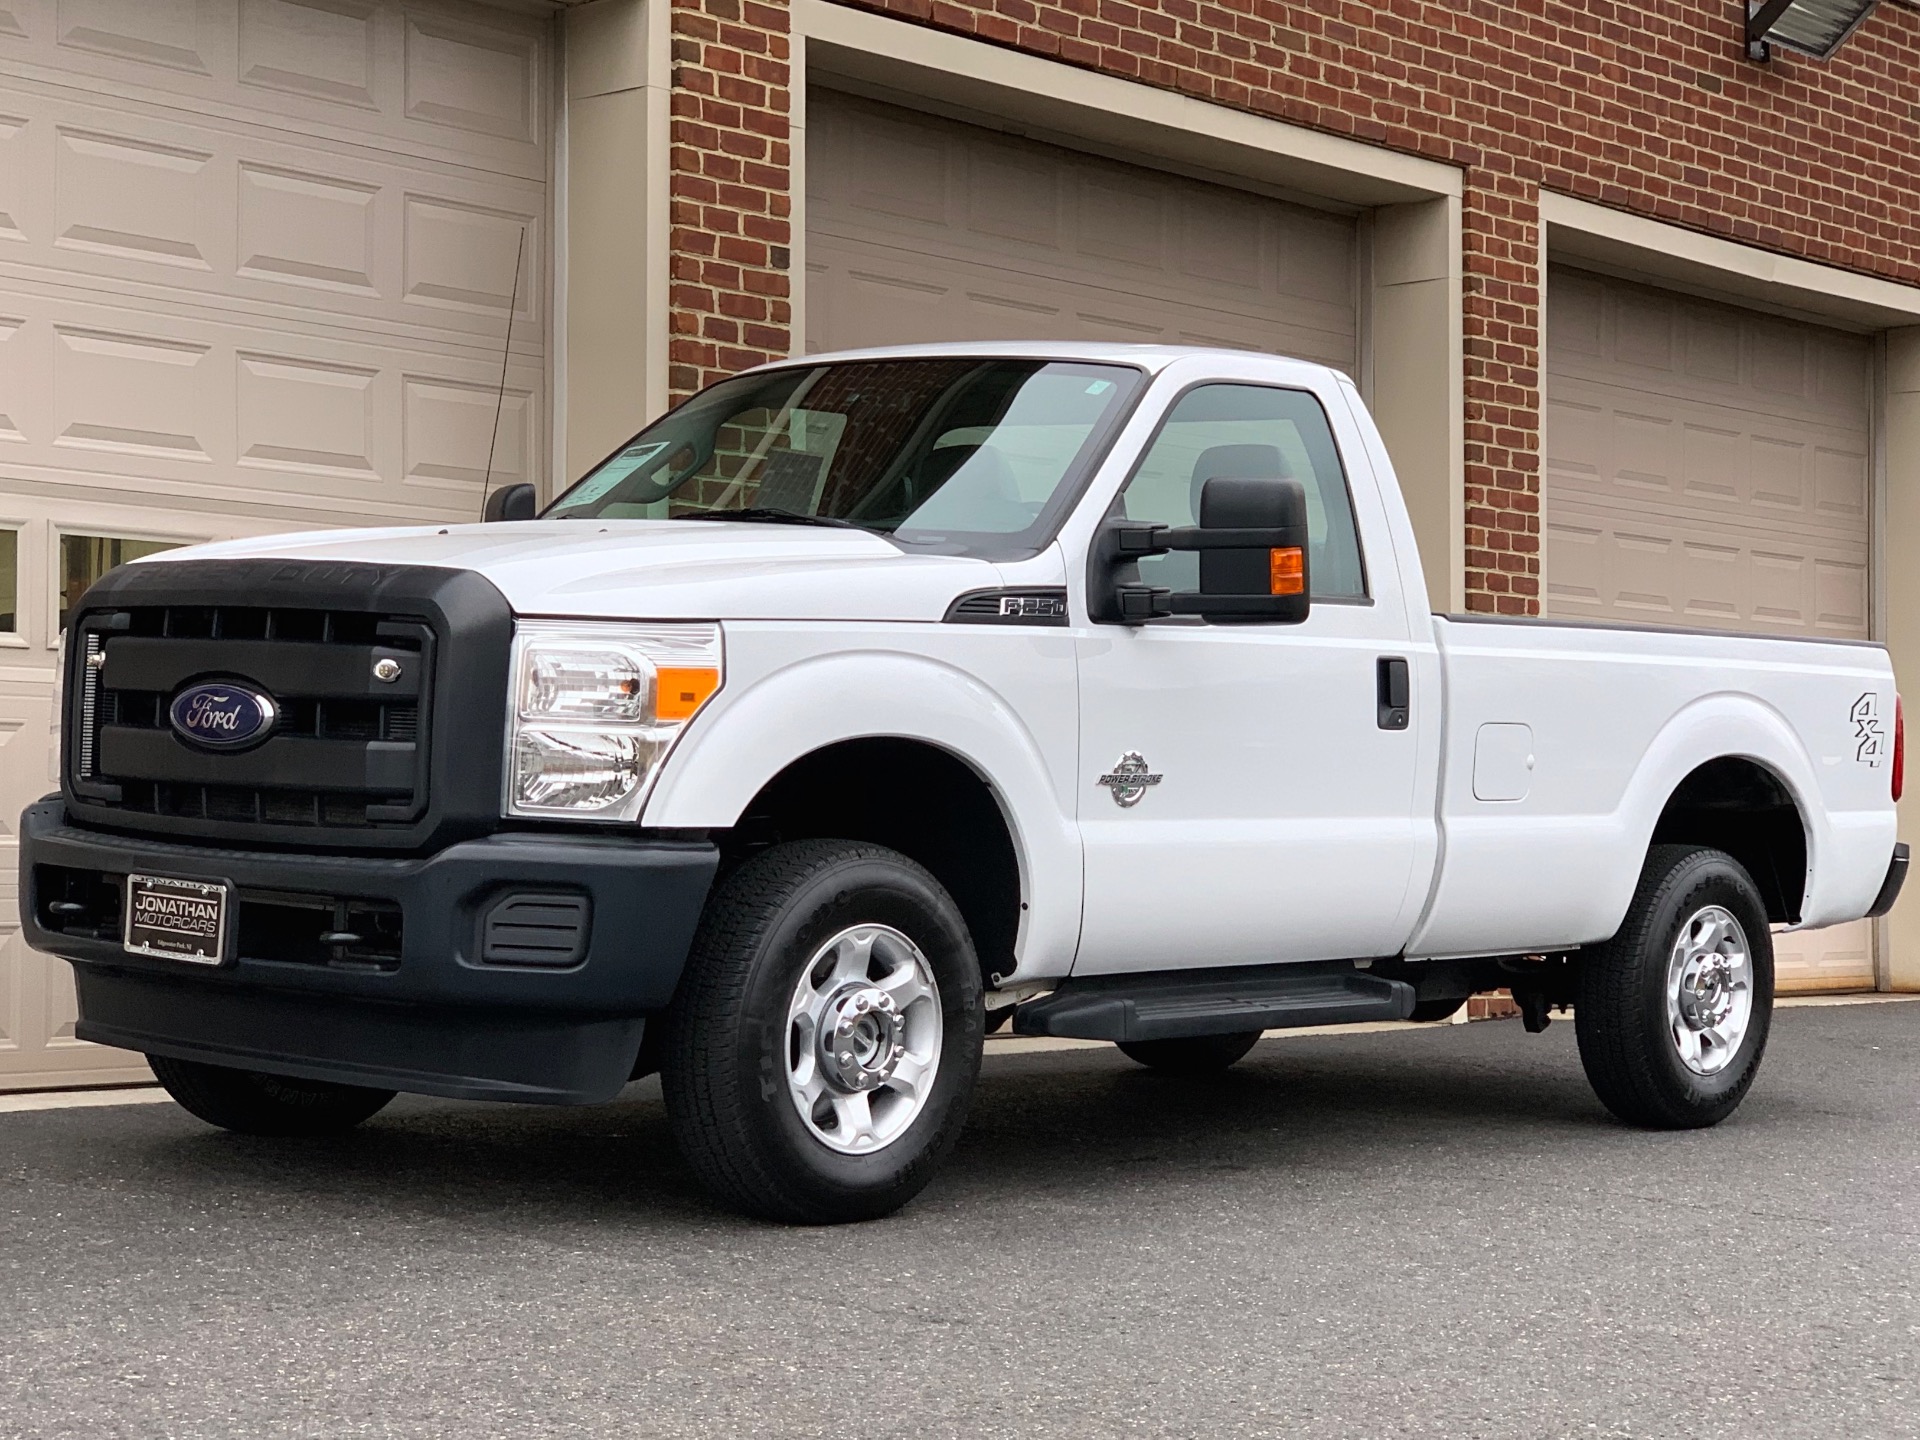 2015 Ford F-250 Super Duty XL Stock # A77529 for sale near Edgewater